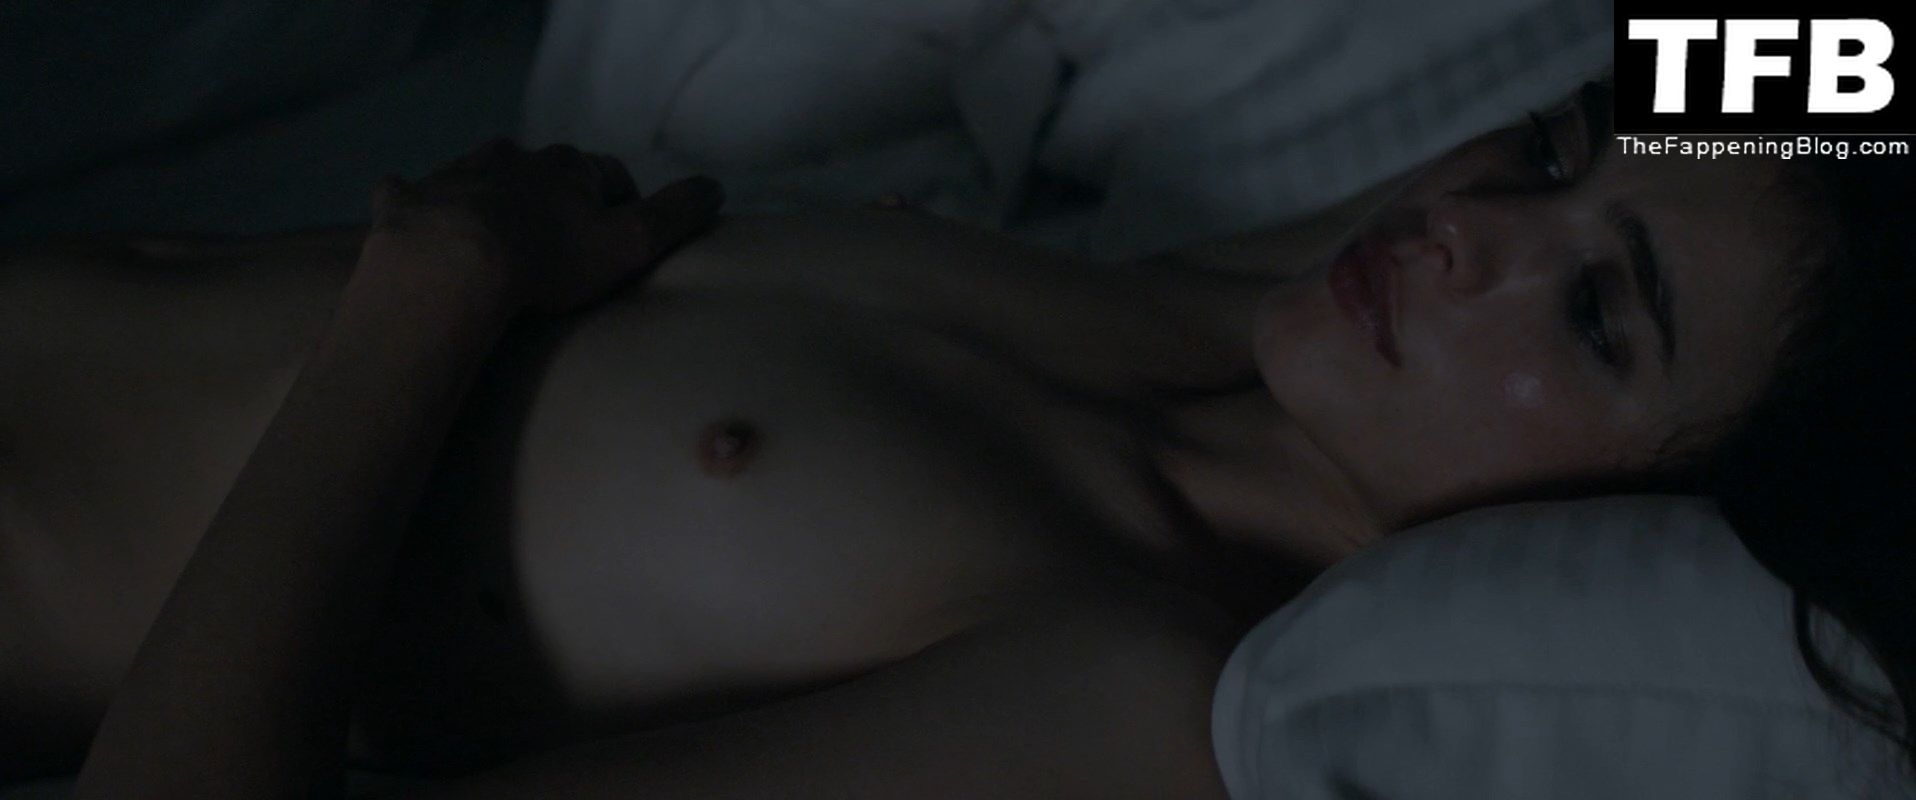 Margaret-Qualley-Nude-Sexy-Stars-at-Noon-The-Fappening-Blog-7.jpg